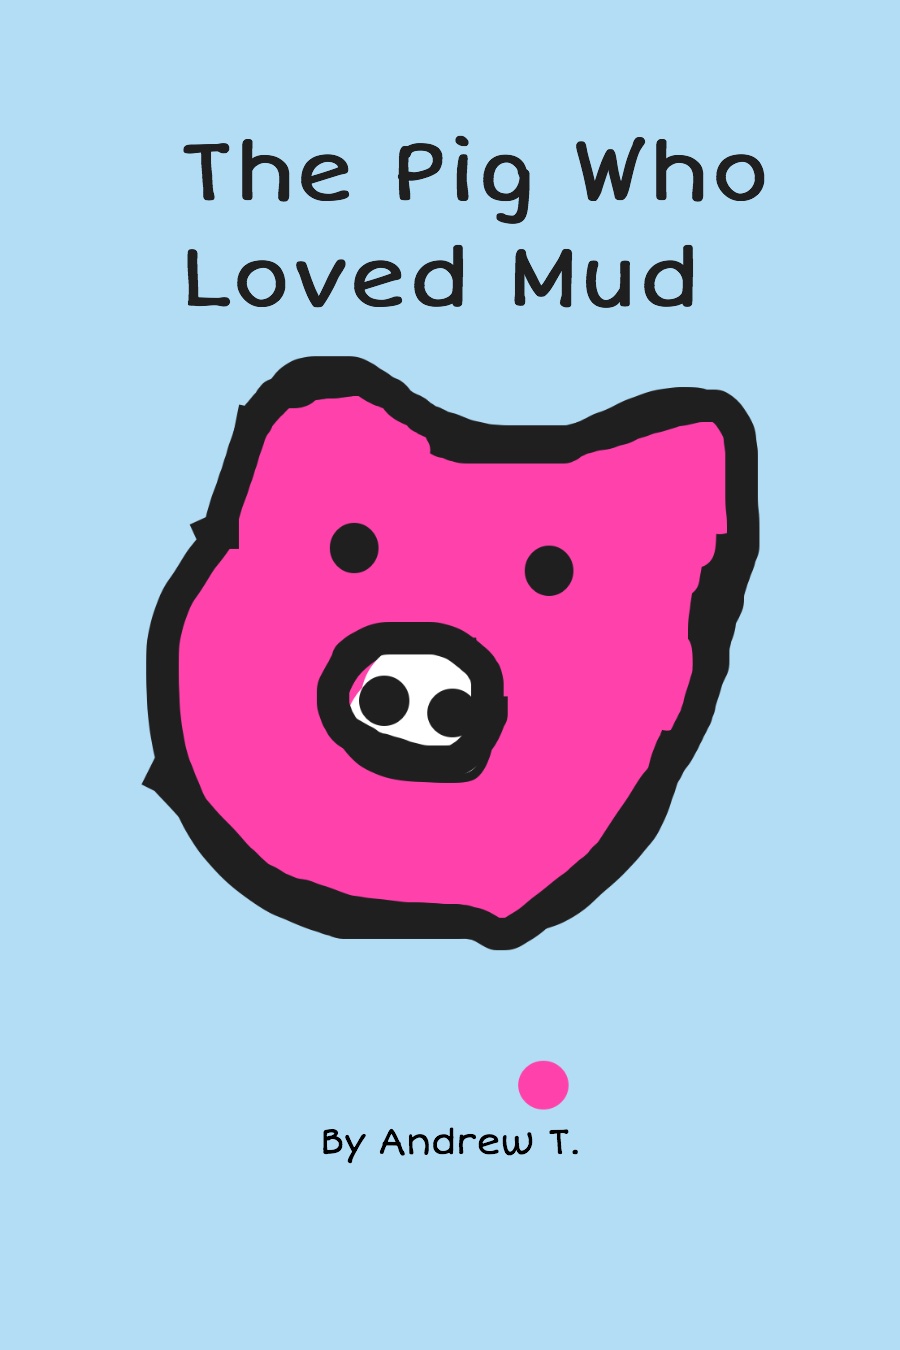 The Pig Who Loved Mud by Andrew T